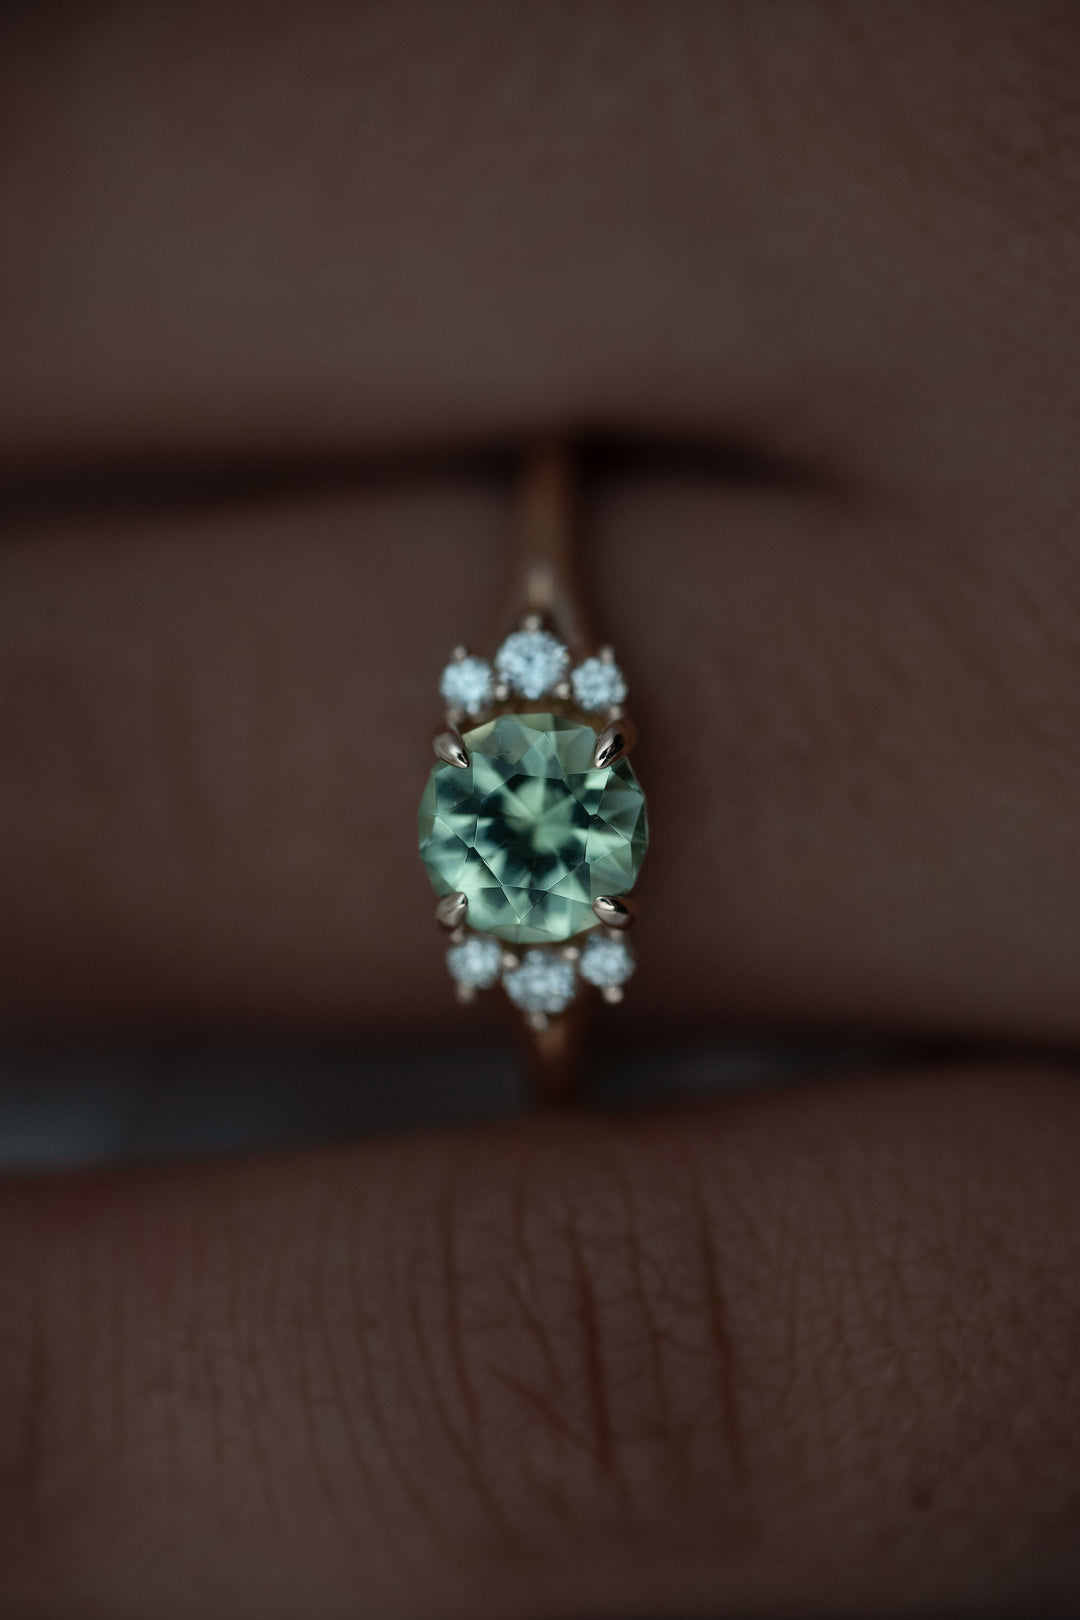 The Delphine 0.80 CT Round Mint Green Tourmaline Ring